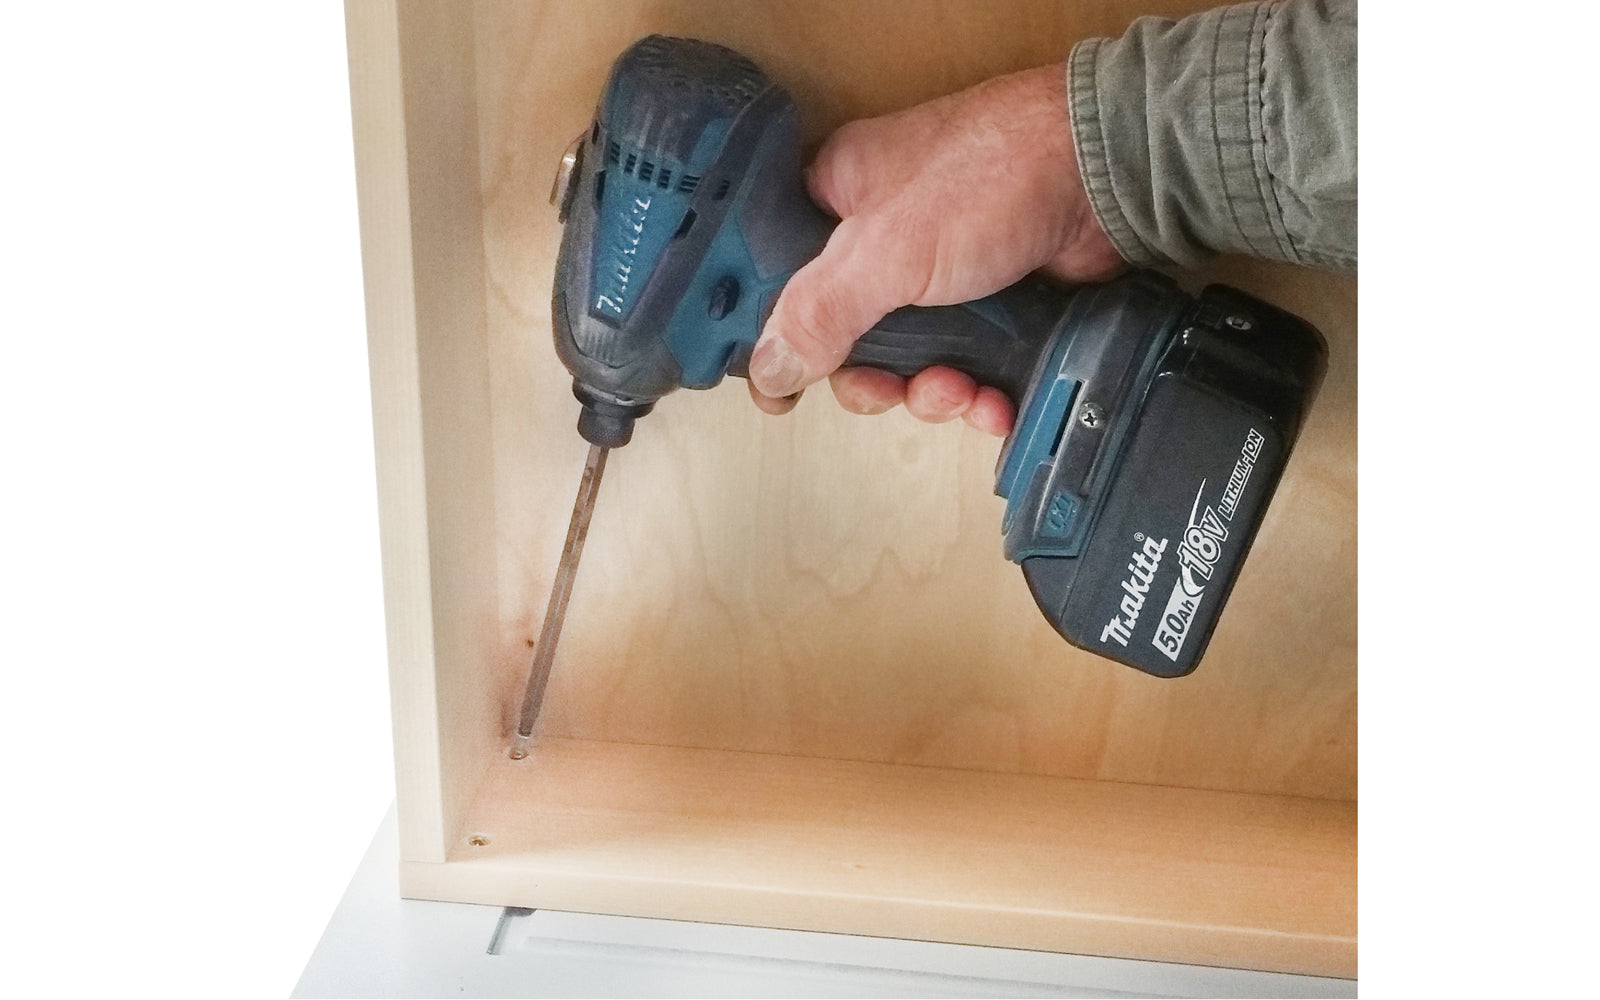 FastCap 15° Drawer Drilling Jig (DDJ) will increase the speed & quality when attaching 5-piece shaker drawer fronts. The DDJ allows you to drill a pilot hole at PRECISELY a 15° angle through the corner of the drawer. FastCap Model 15DDJ. Durable bushings inside jig